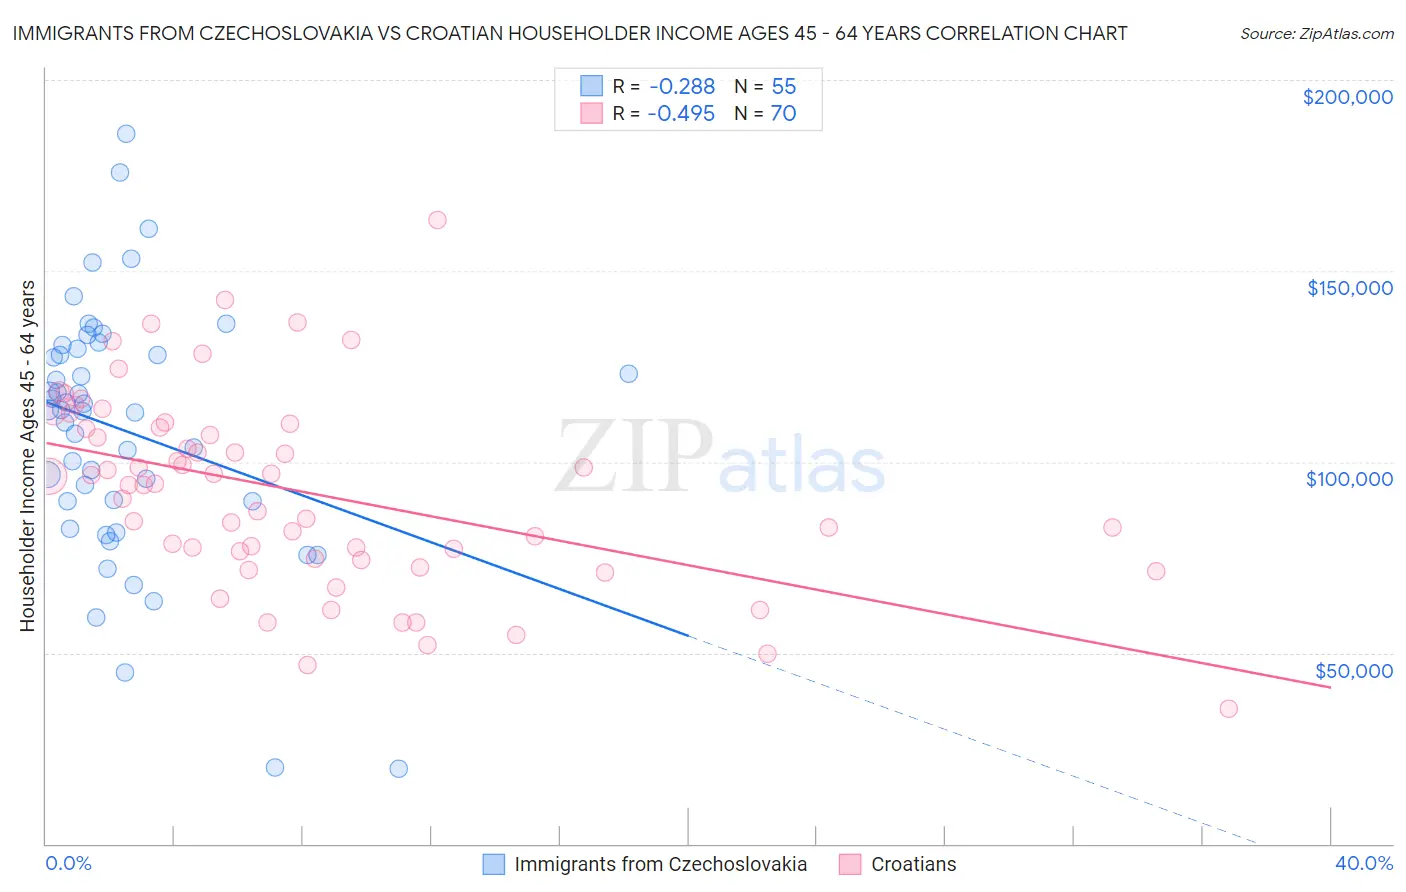 Immigrants from Czechoslovakia vs Croatian Householder Income Ages 45 - 64 years